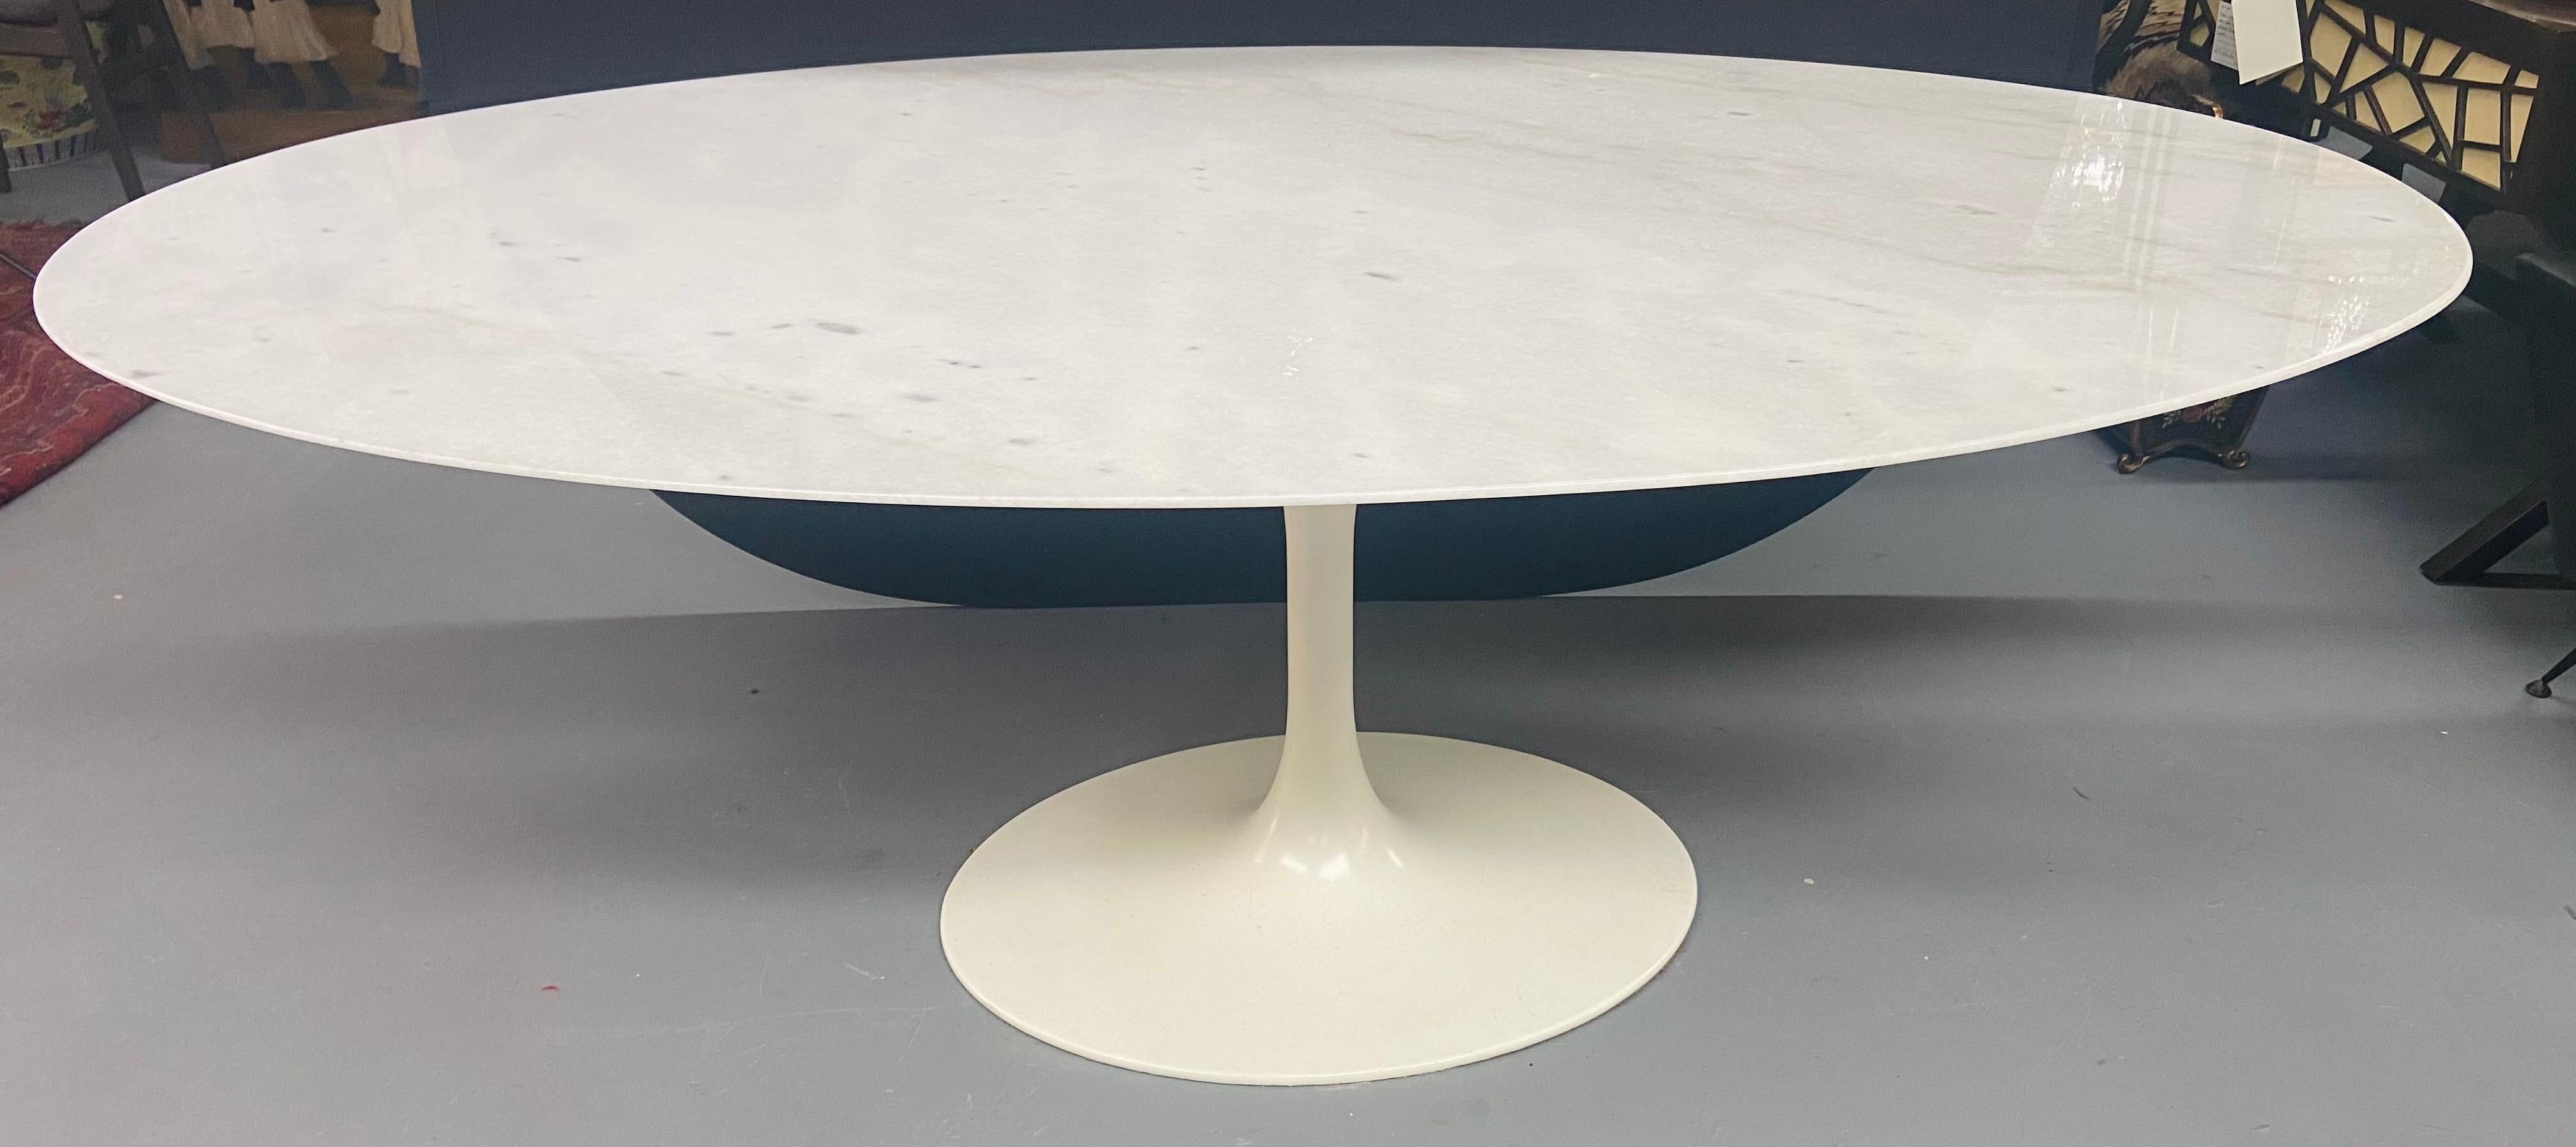 A Mid-Century Modern Eero Saarinen for Knoll oval marble-top dining table featuring a cast iron white lacquered base. This beautiful 78